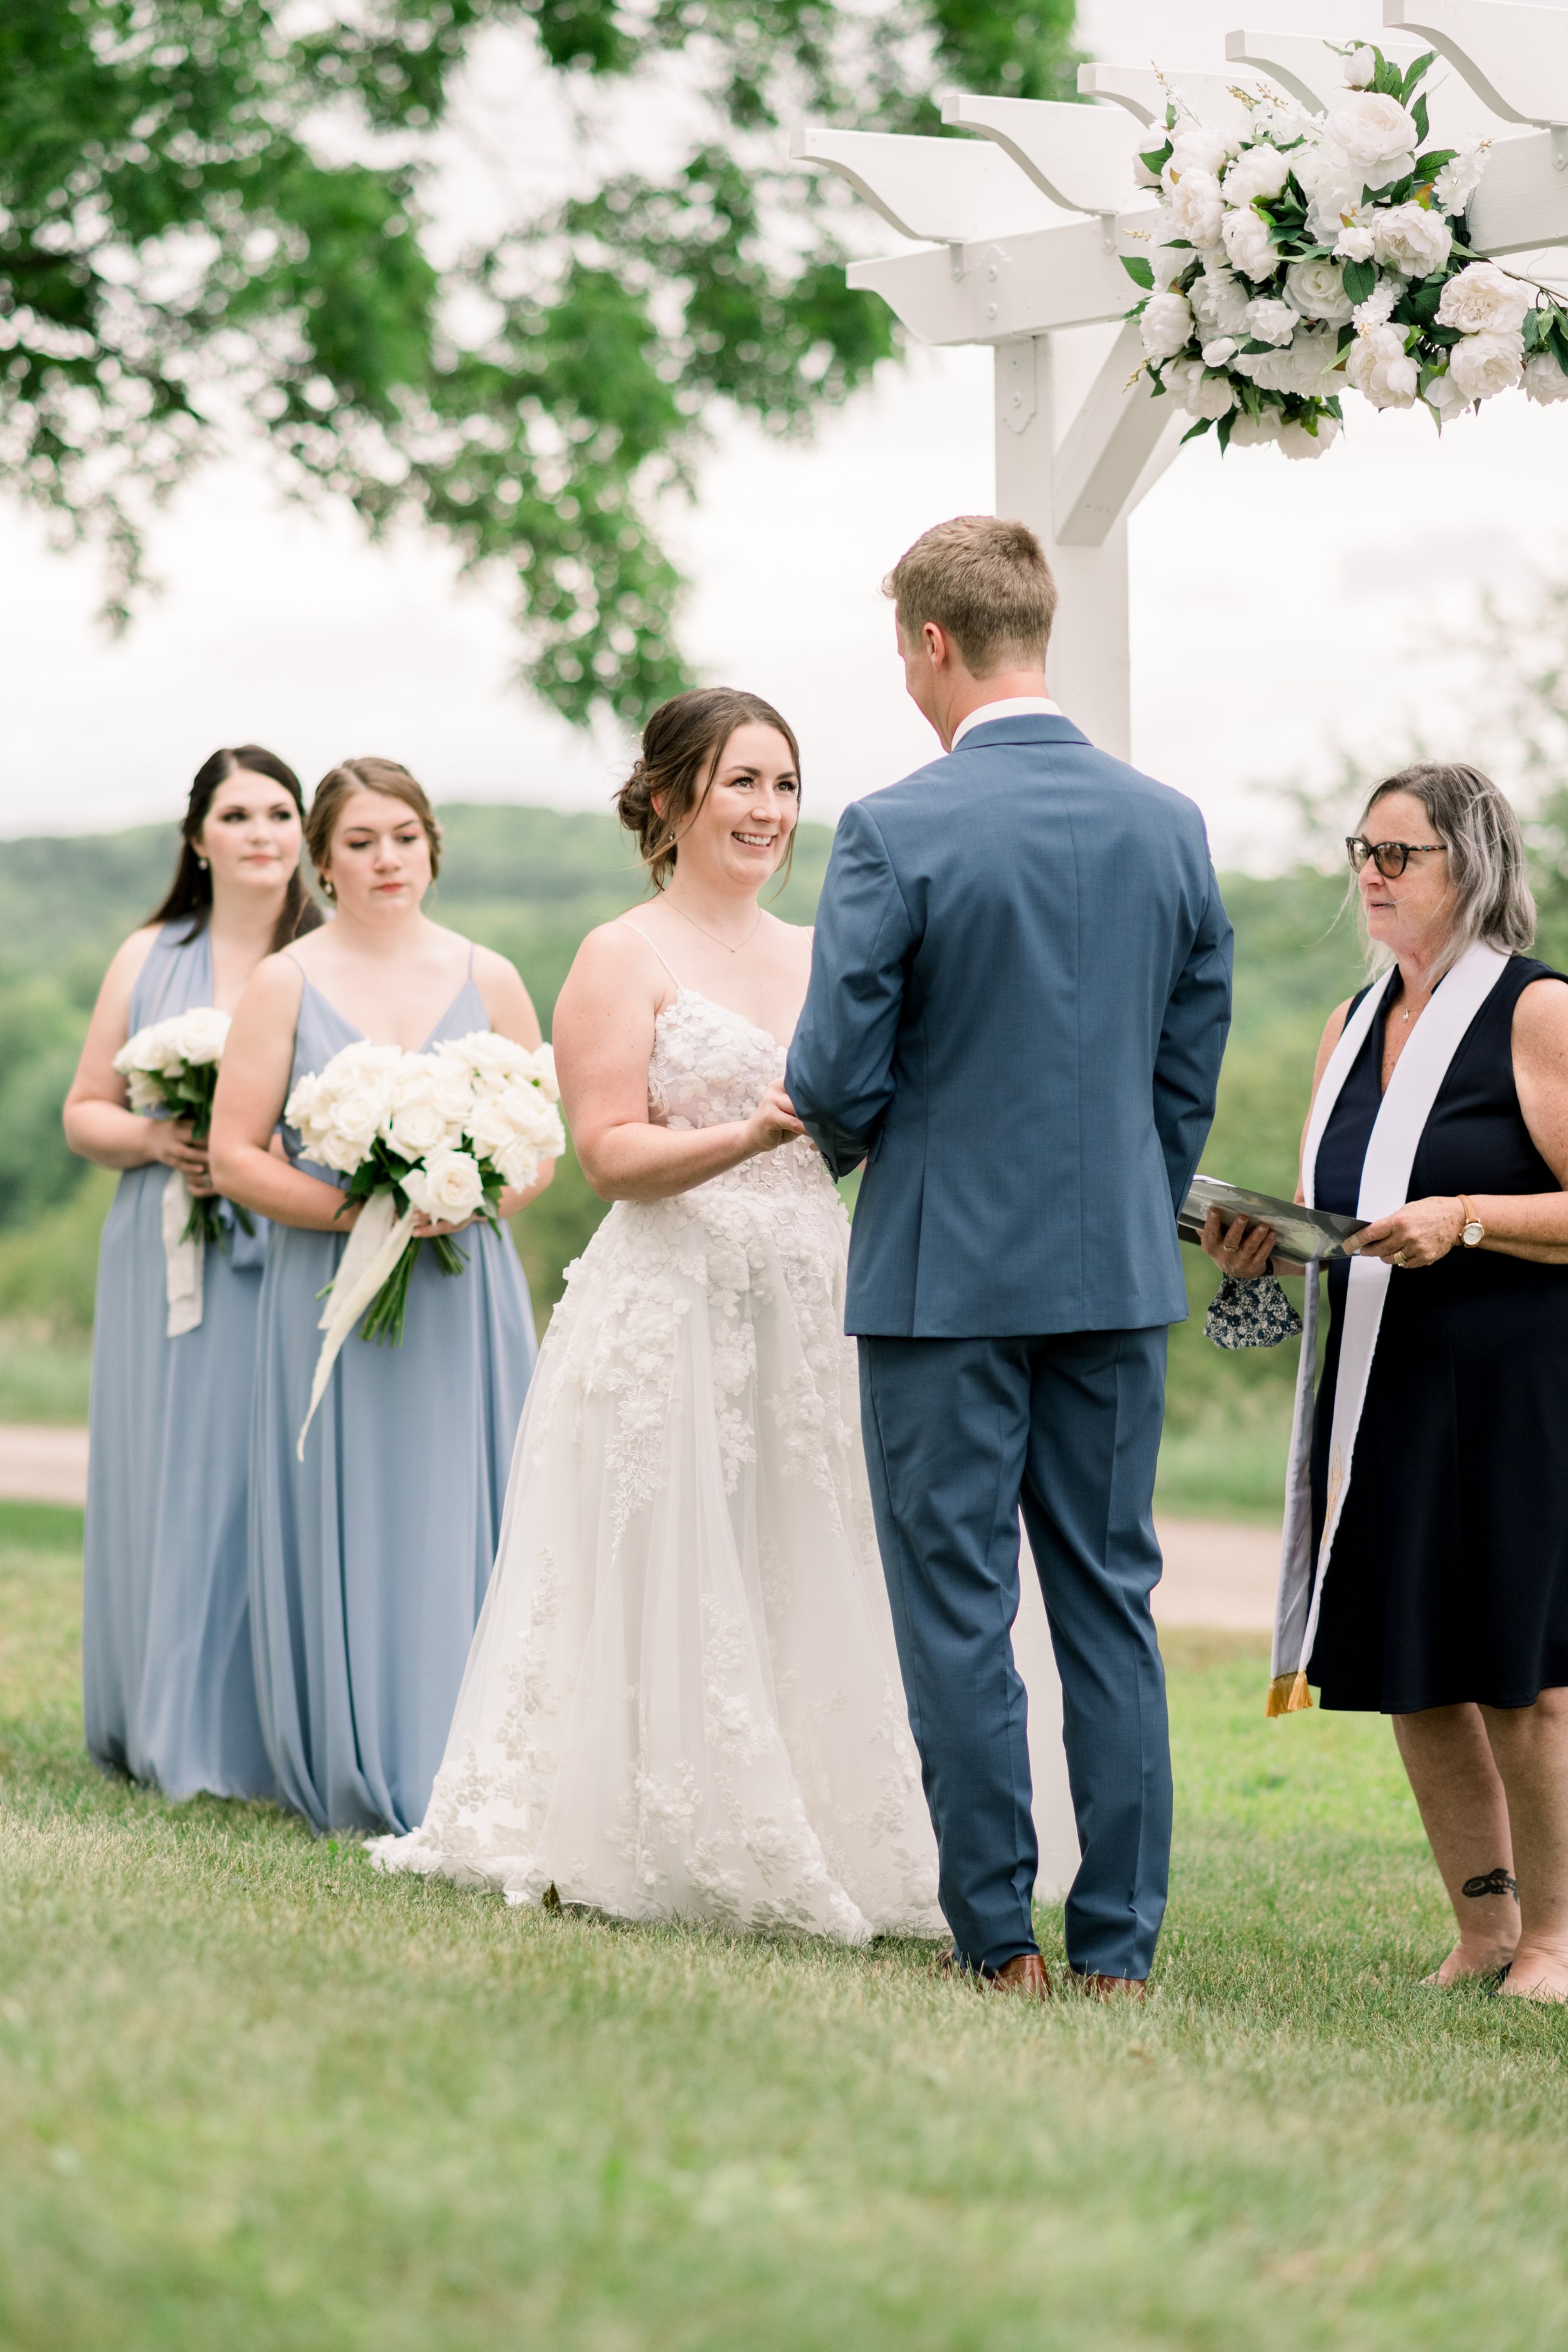  A bride smiles glowingly as the groom holds her hand at the altar by Chelsea Mason Photography. bride and groom at altar summer wedding #chelseamasonphotography #chelseamasonweddings #Ontarioweddings #Boulterweddingphotographer #laceweddinggown 